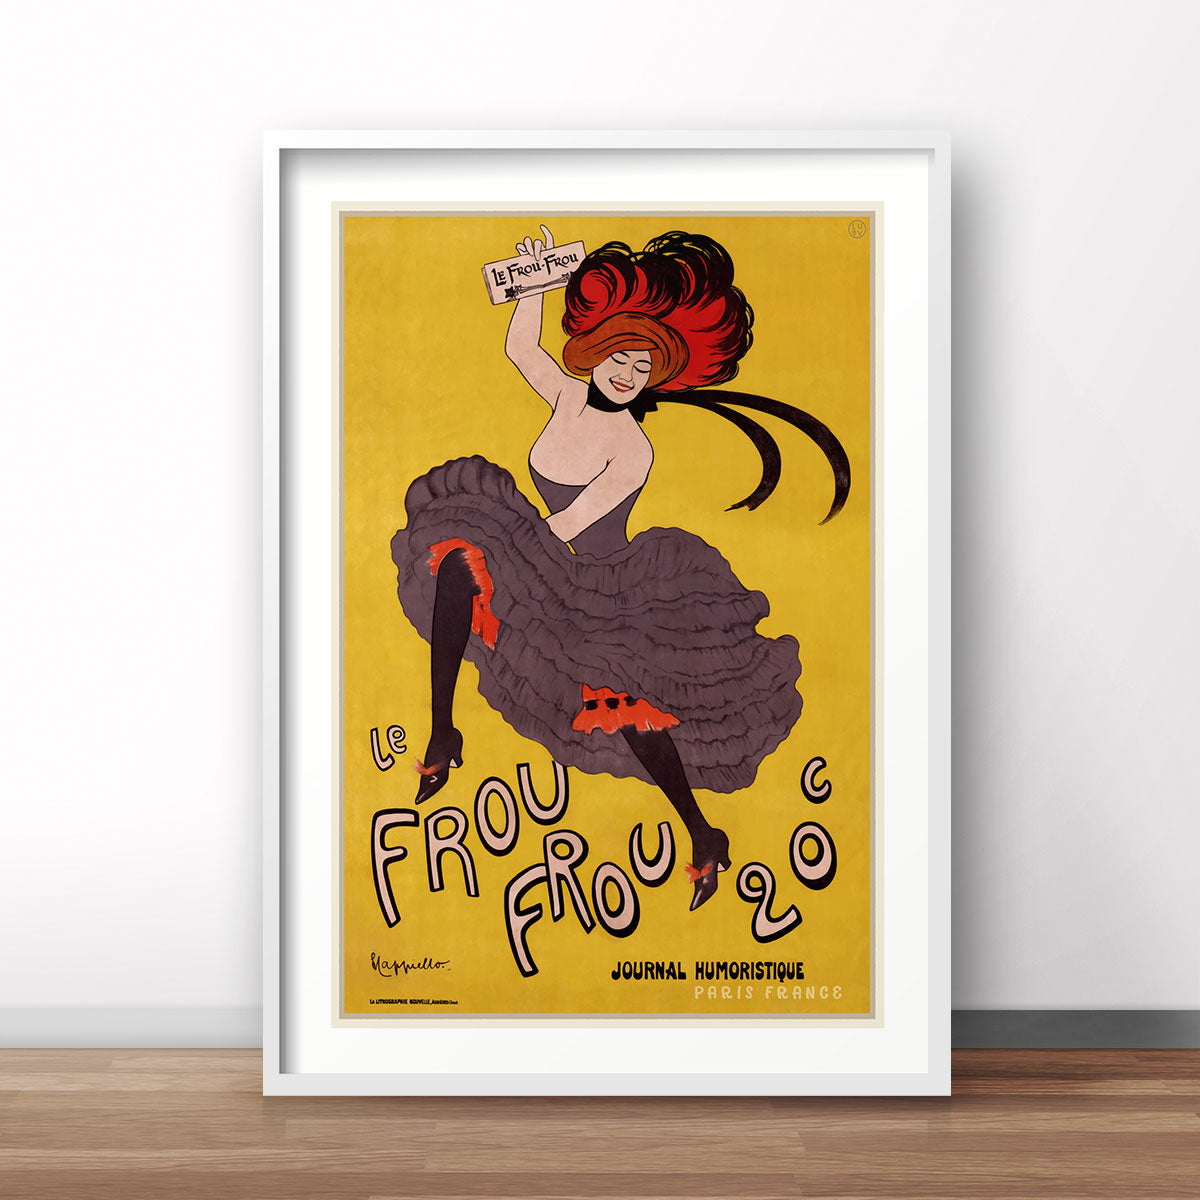 Frou Frou Journal Paris retro vintage poster from Places We Luv